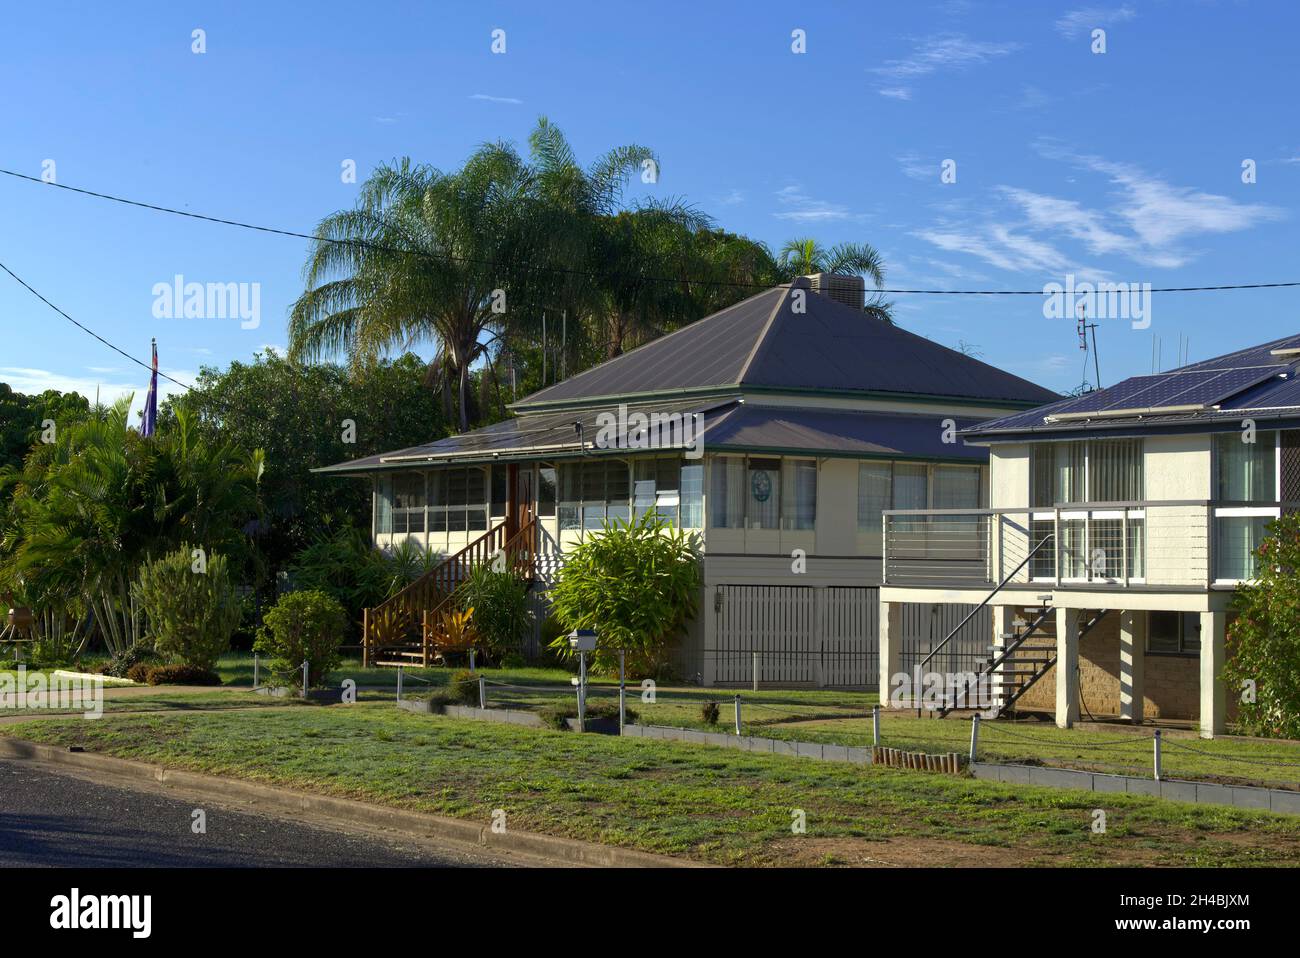 Residential house forming part of the streetscape on Meson Street Gayndah Queensland Australia Stock Photo